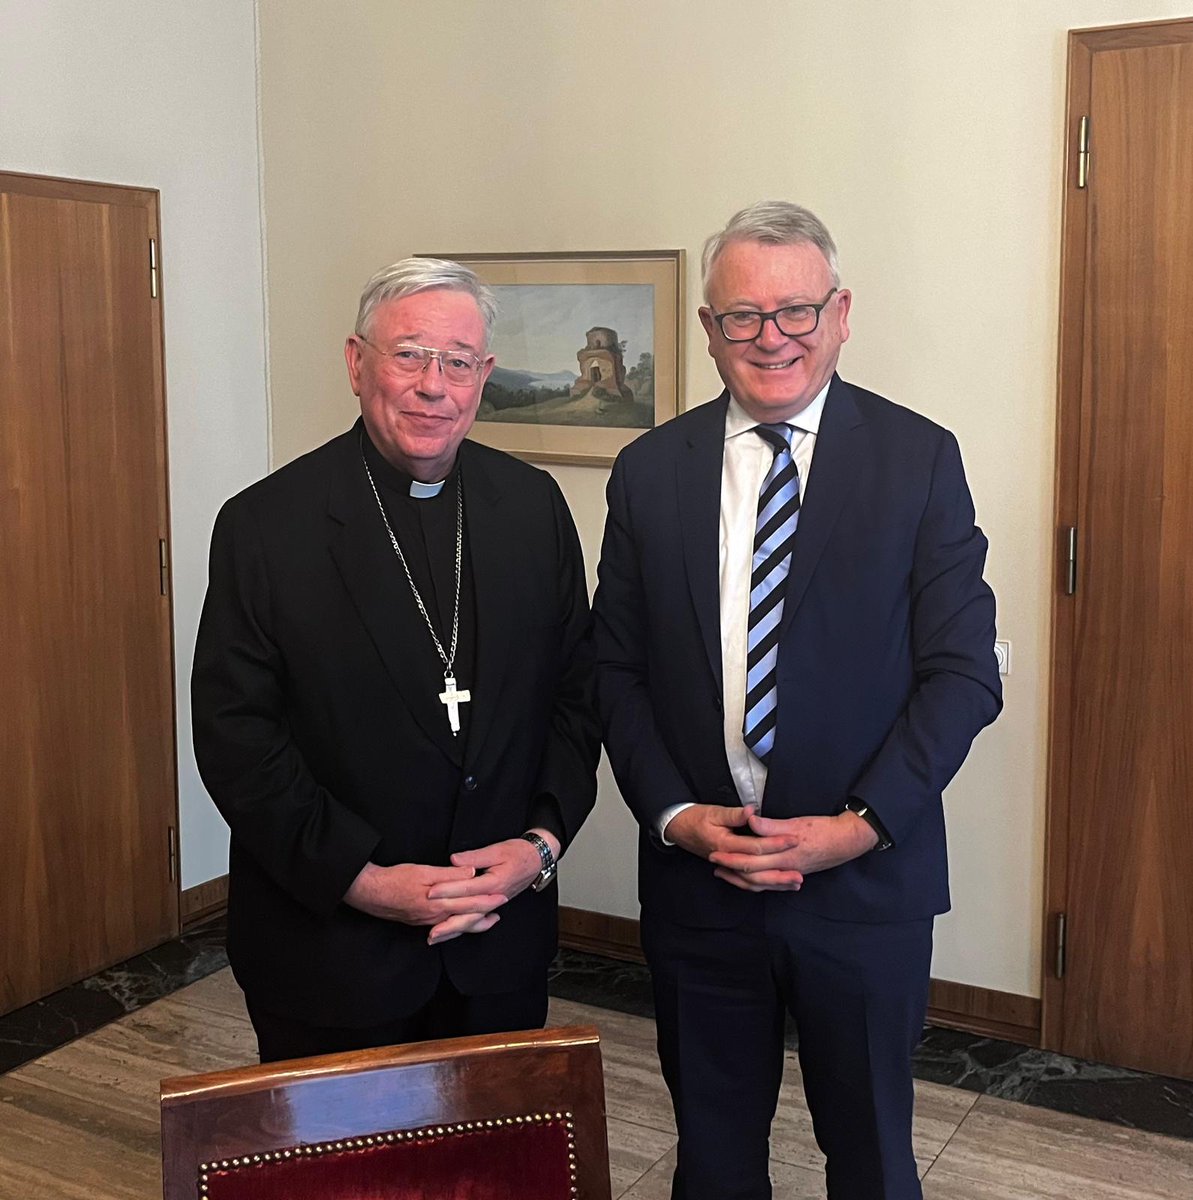 Interesting discussions with former @ComeceEu President @cardinal_jch on the future of the EU. We should never lose sight of our European values based on empathy and solidarity. Fighting poverty and protecting human rights needs to be a priority for the next Commission.